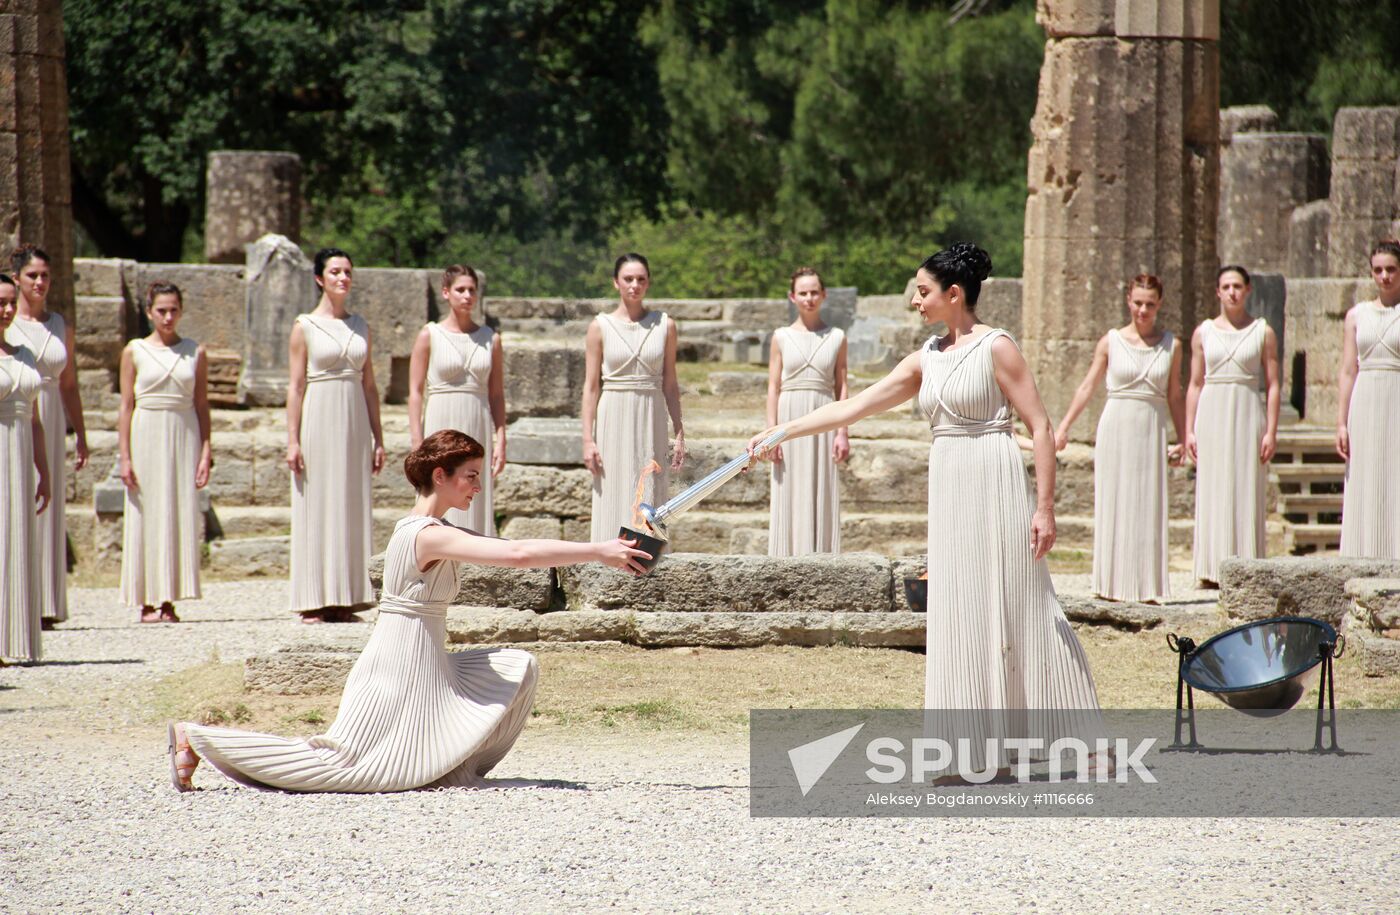 Rehearsal of Olympic flame lighting in Greece for London Games